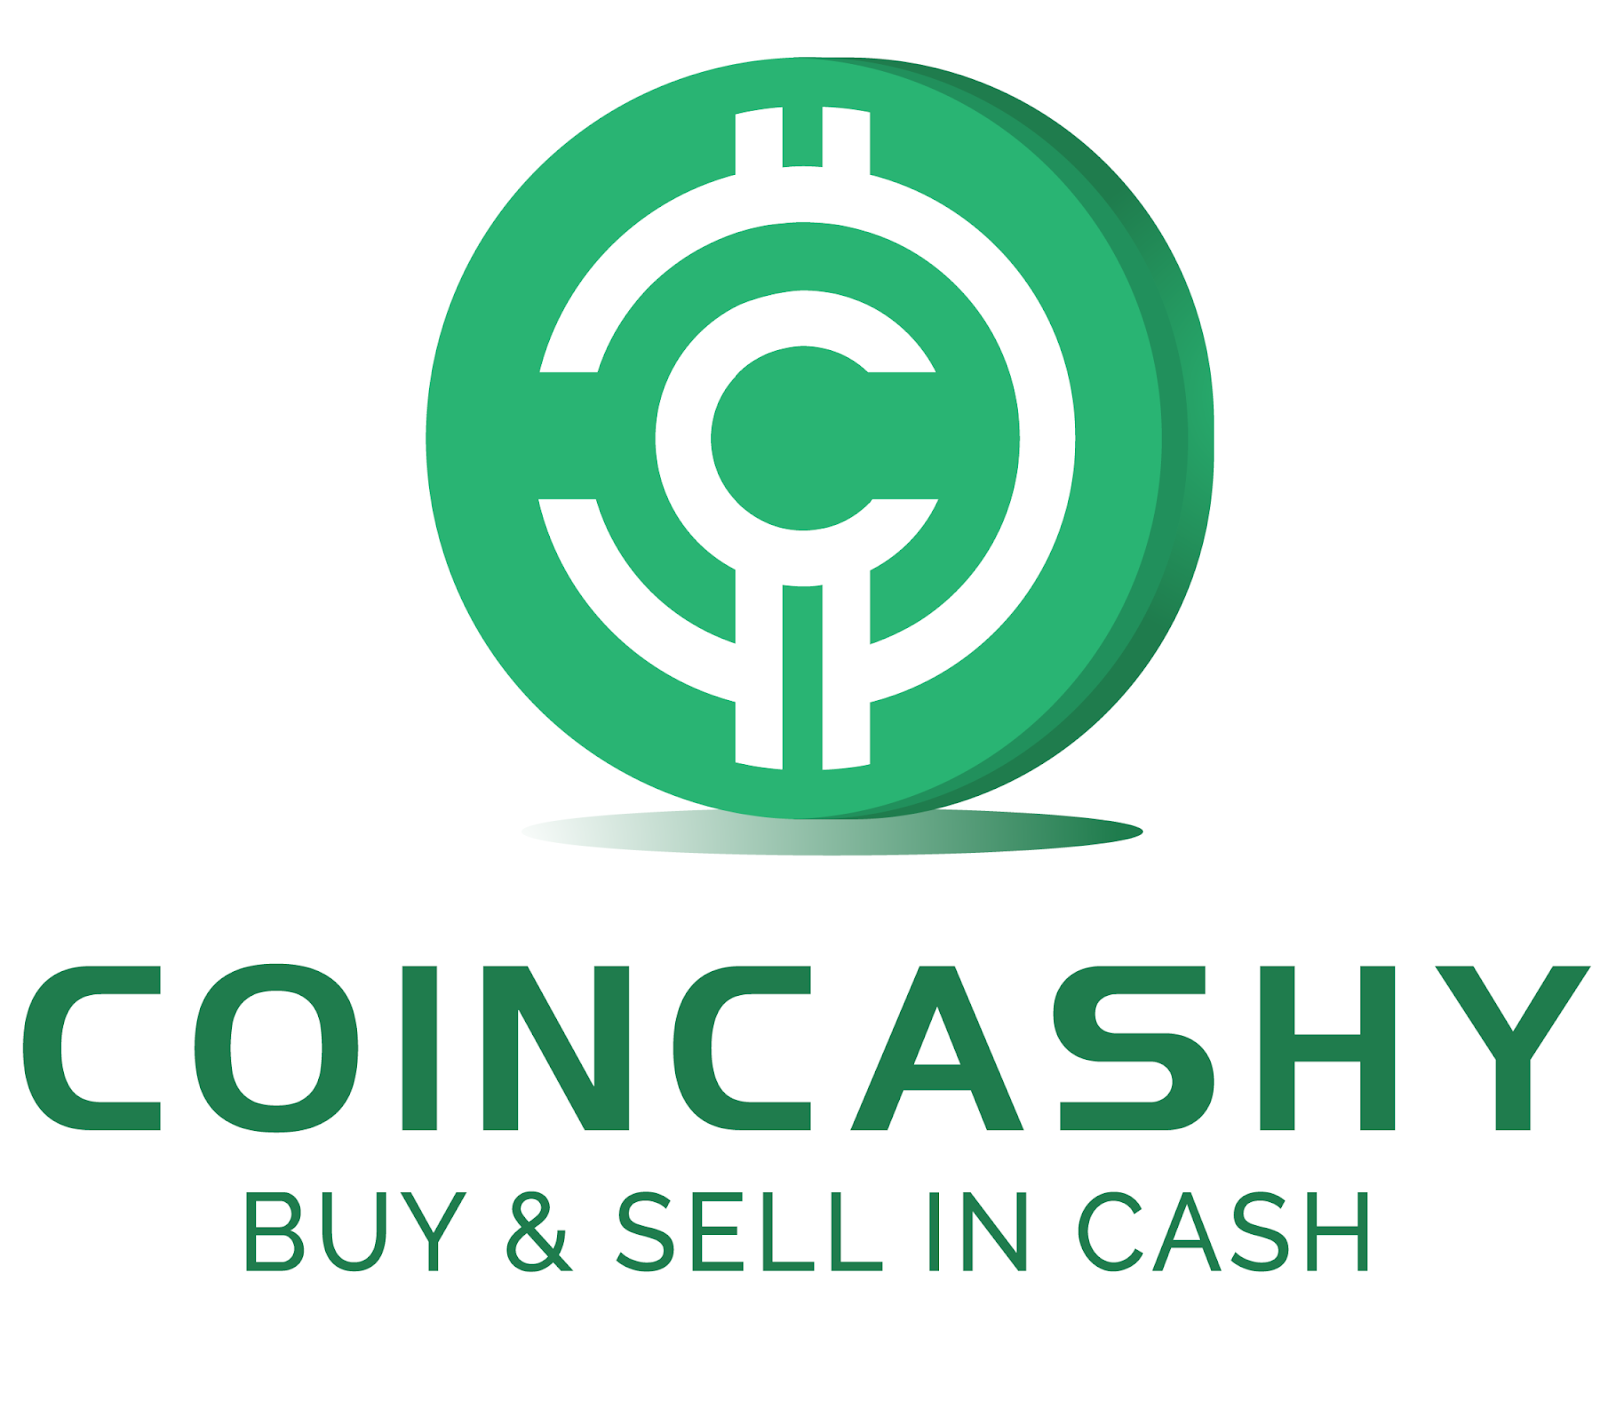 Coincashy Emerges as the Best Fiat to Crypto and Crypto to Fiat Exchange in the UAE